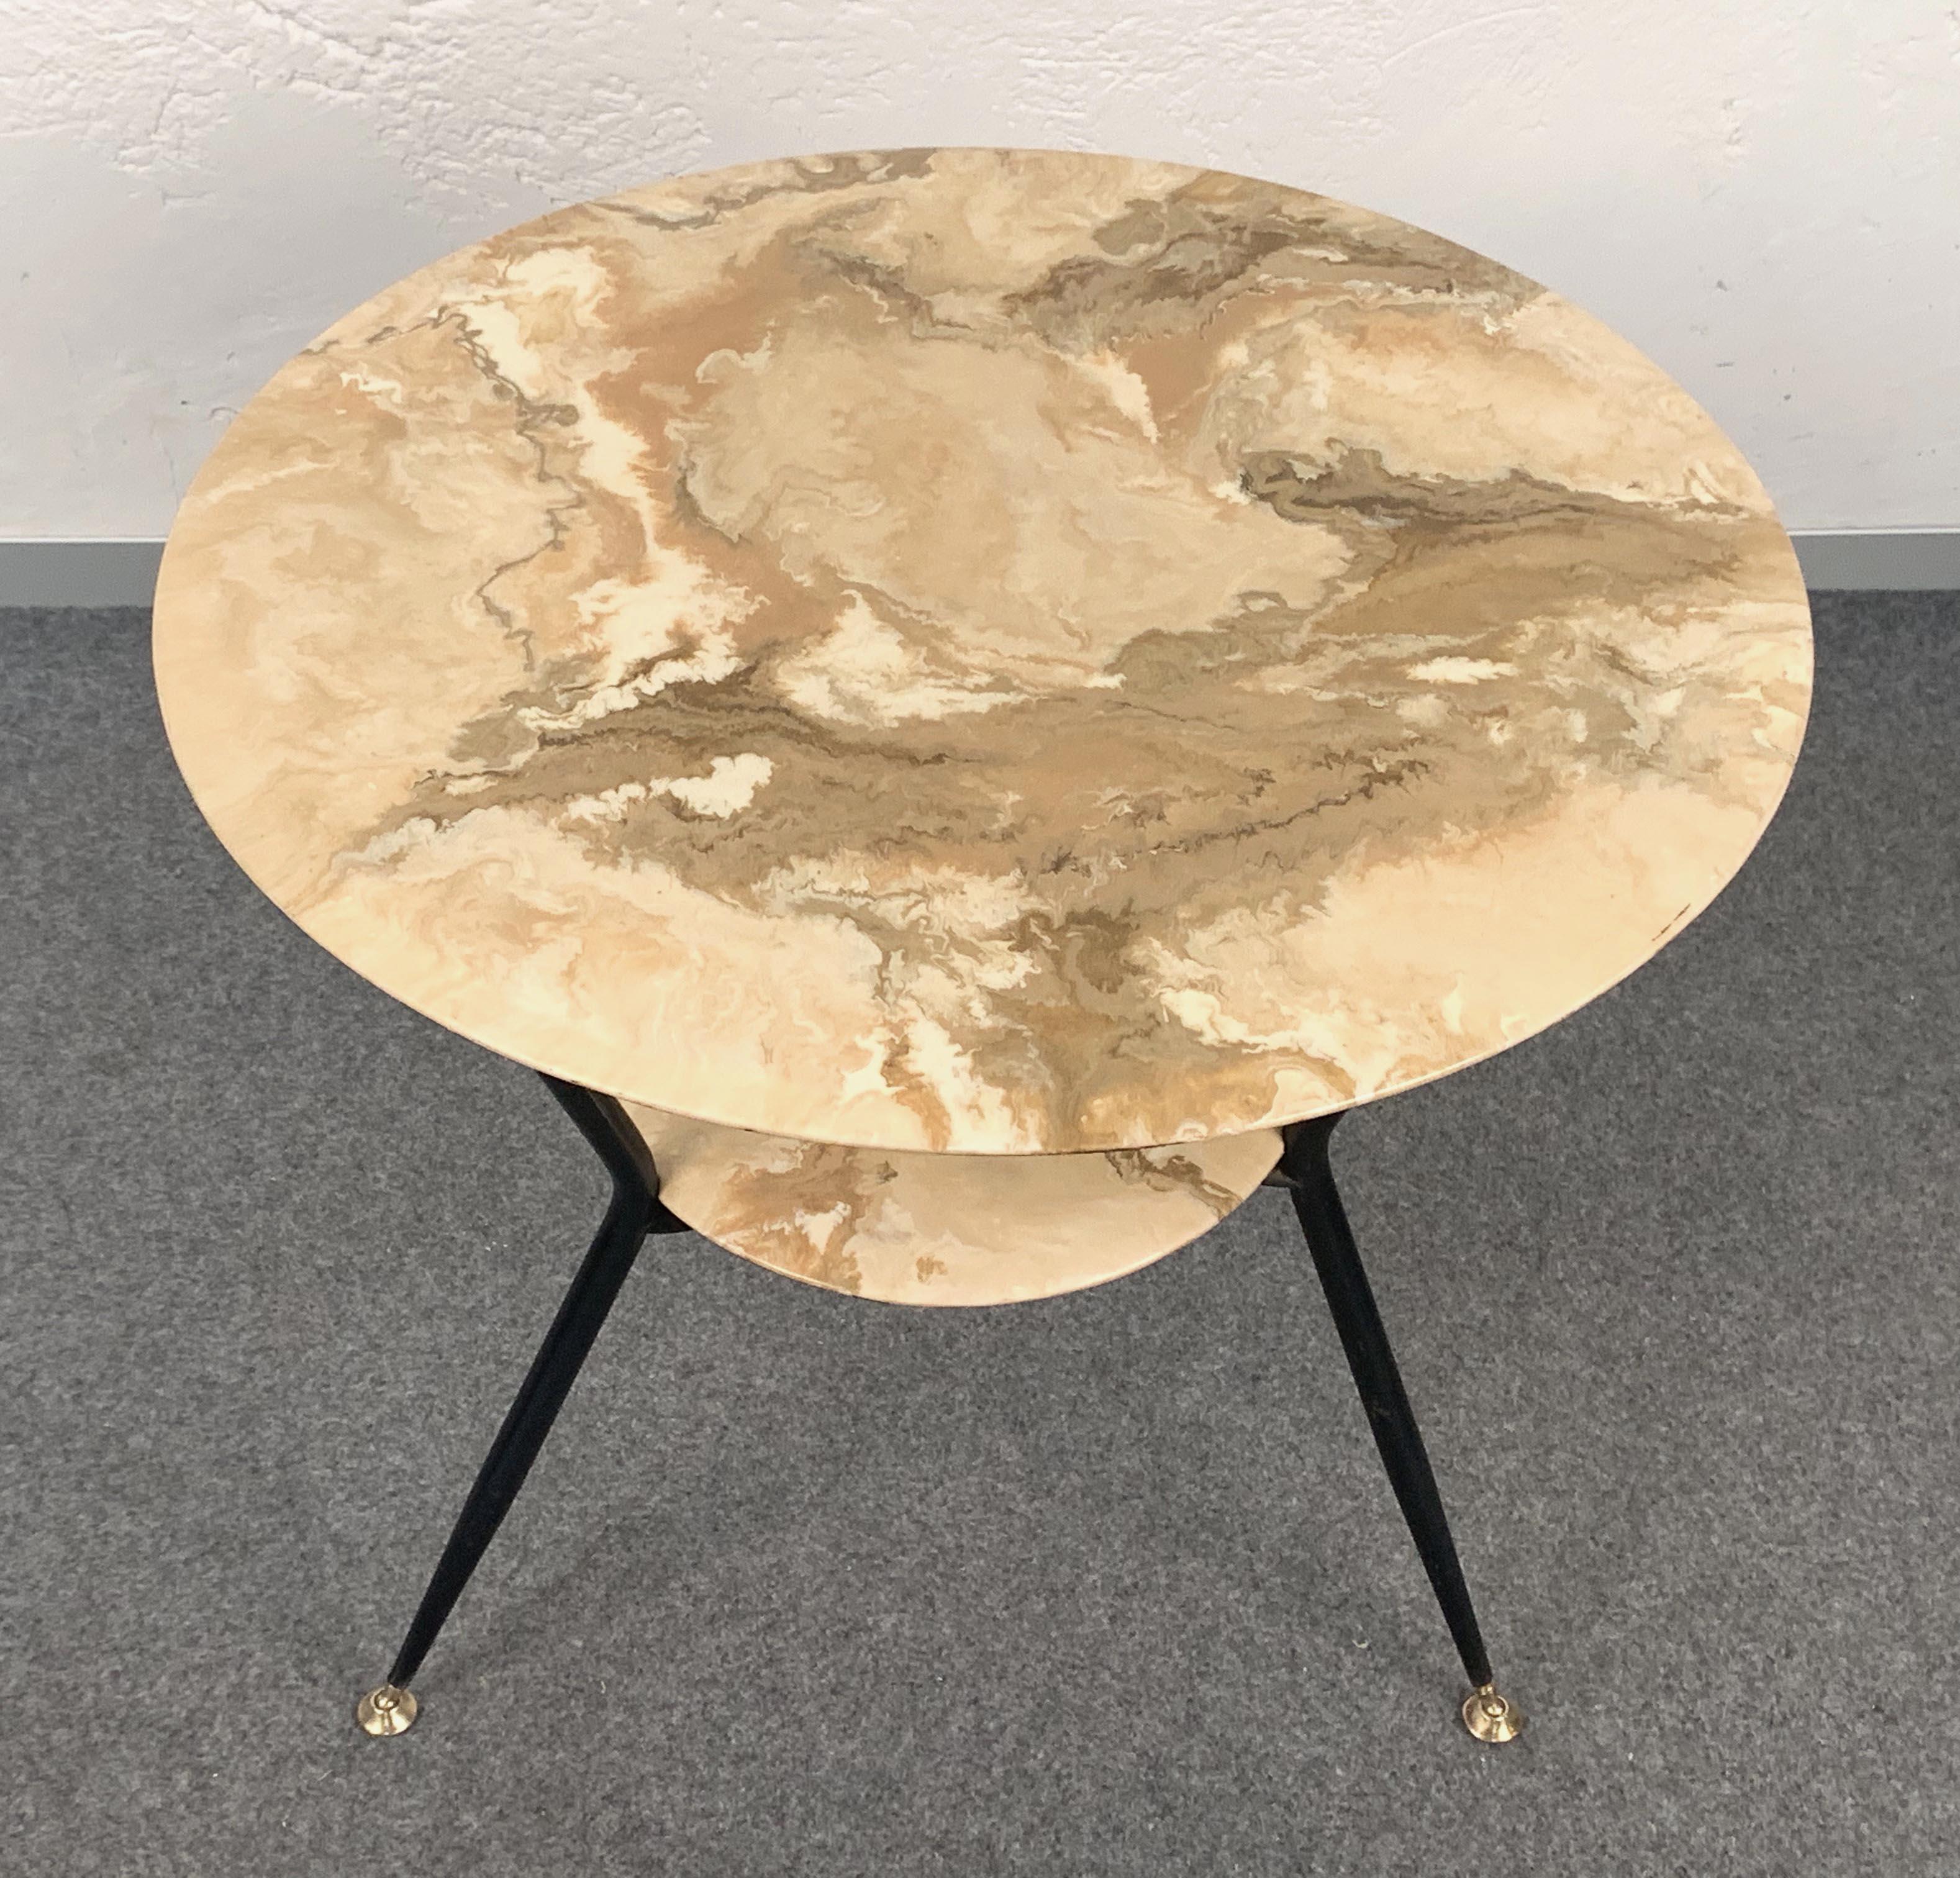 20th Century Round Marbled Wood Coffee Double Level Italian Table with Brass Feet, 1950s